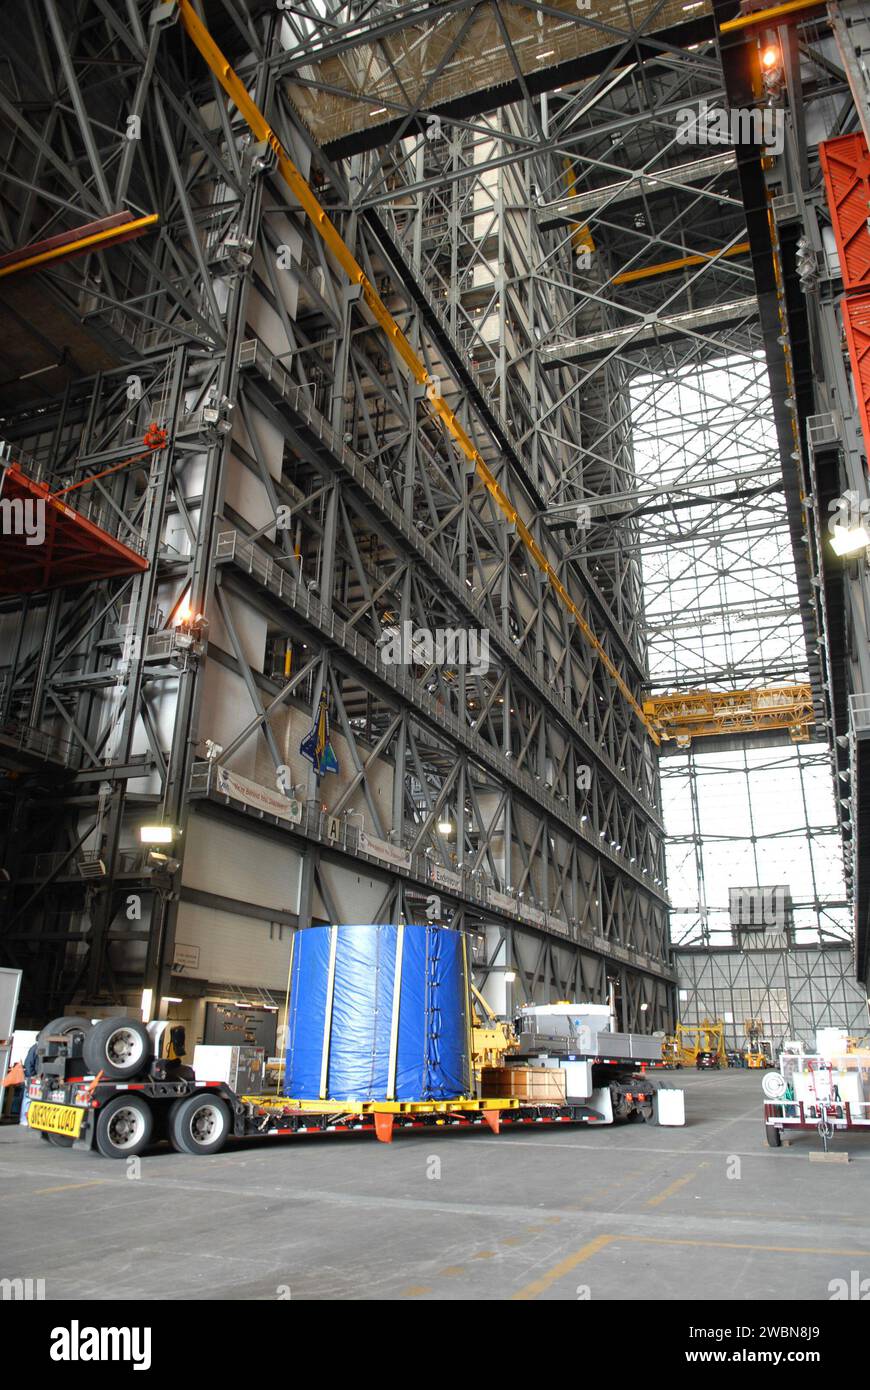 CAPE CANAVERAL, Fla. – The Ares I-X fifth segment simulator aft section arrives in the Vehicle Assembly Building at NASA's Kennedy Space Center in Florida.  Ares I-X is the test vehicle for the Ares I, which is part of the Constellation Program to return men to the moon and beyond. Ares I is the essential core of a safe, reliable, cost-effective space transportation system that eventually will carry crewed missions back to the moon, on to Mars and out into the solar system. Ares I-X is targeted for launch in July 2009. Stock Photo